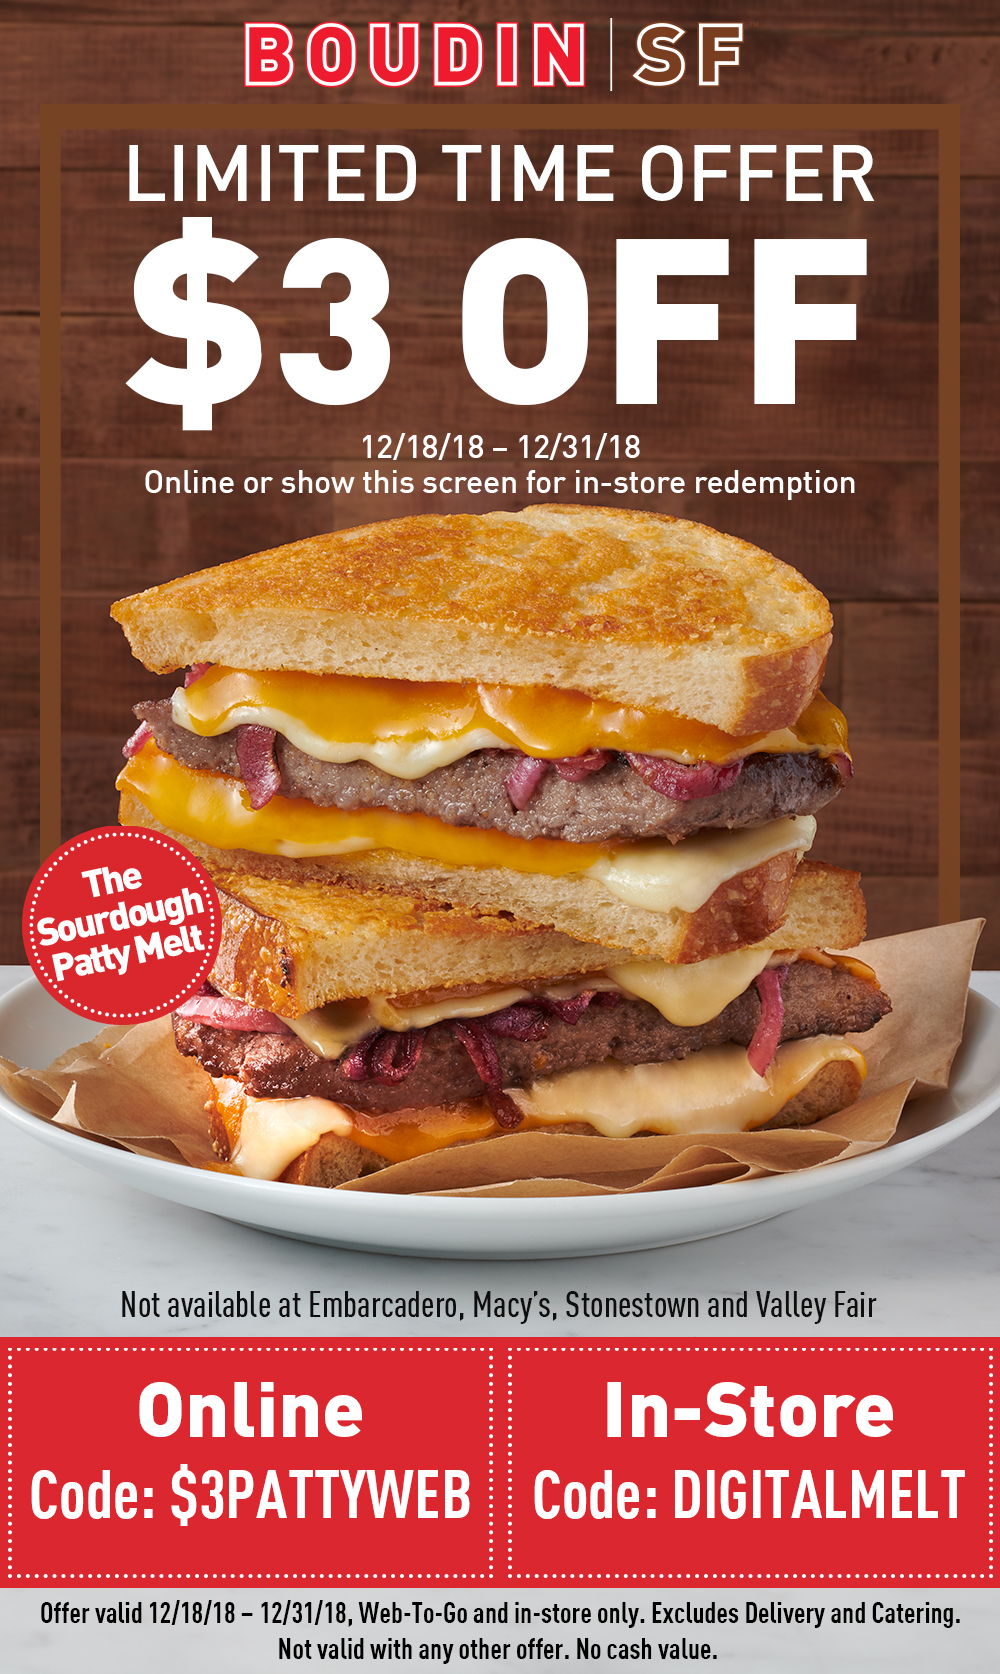 Limited Time. $3 Off the Sourdough Patty Melt.